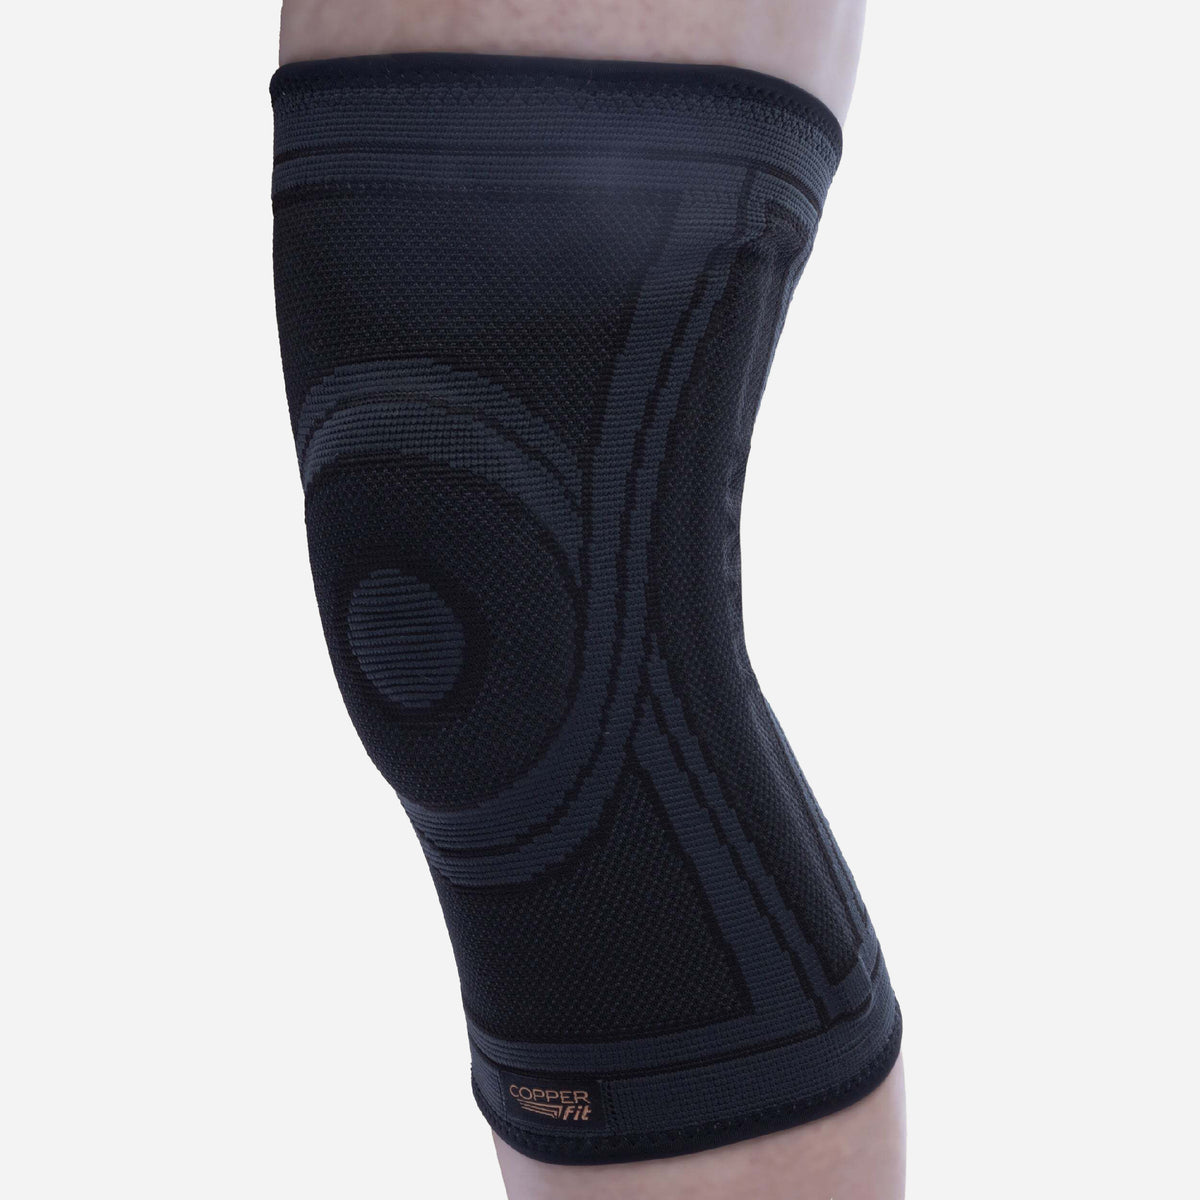 Knee Stabilizer Sleeve - Copper Fit